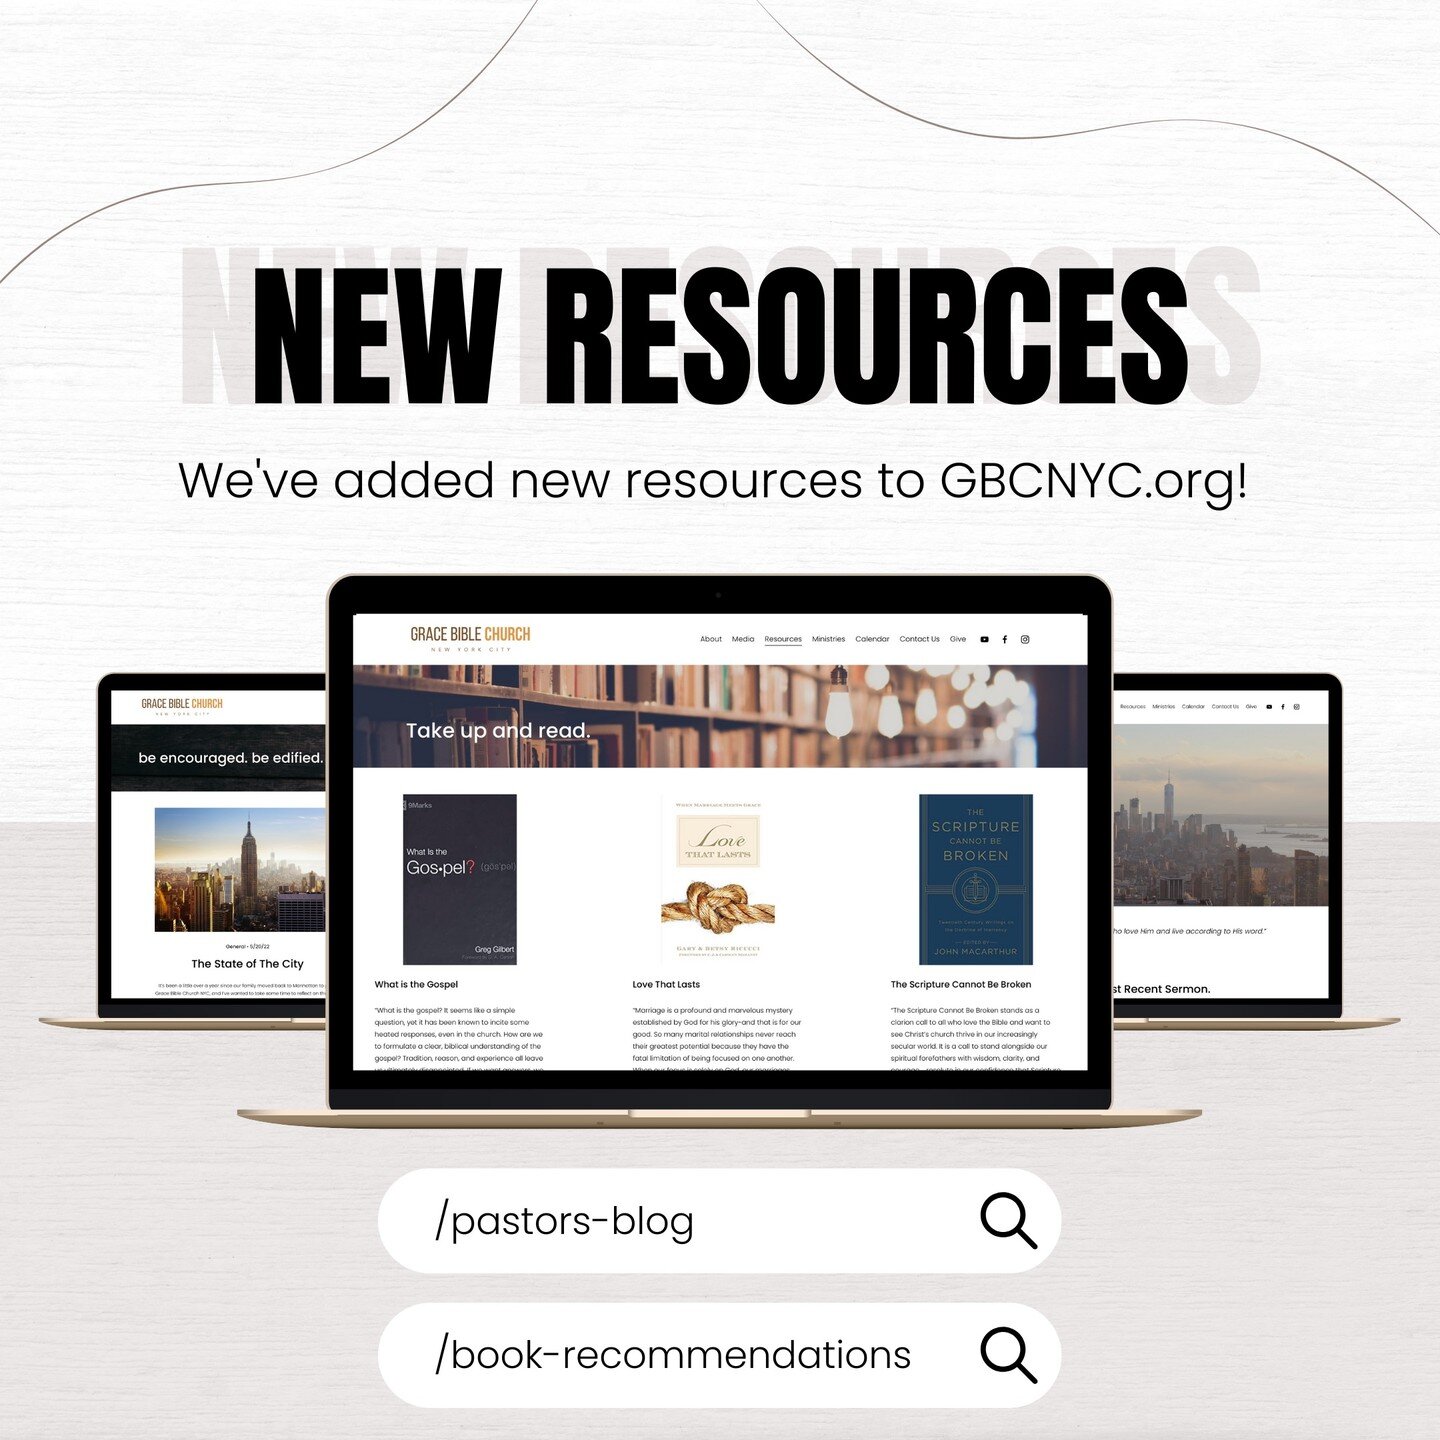 Check out our new resources:
Pastor's Blog: gbcnyc.org/pastors-blog

Book Recommendations: gbcnyc.org/book-recommendations